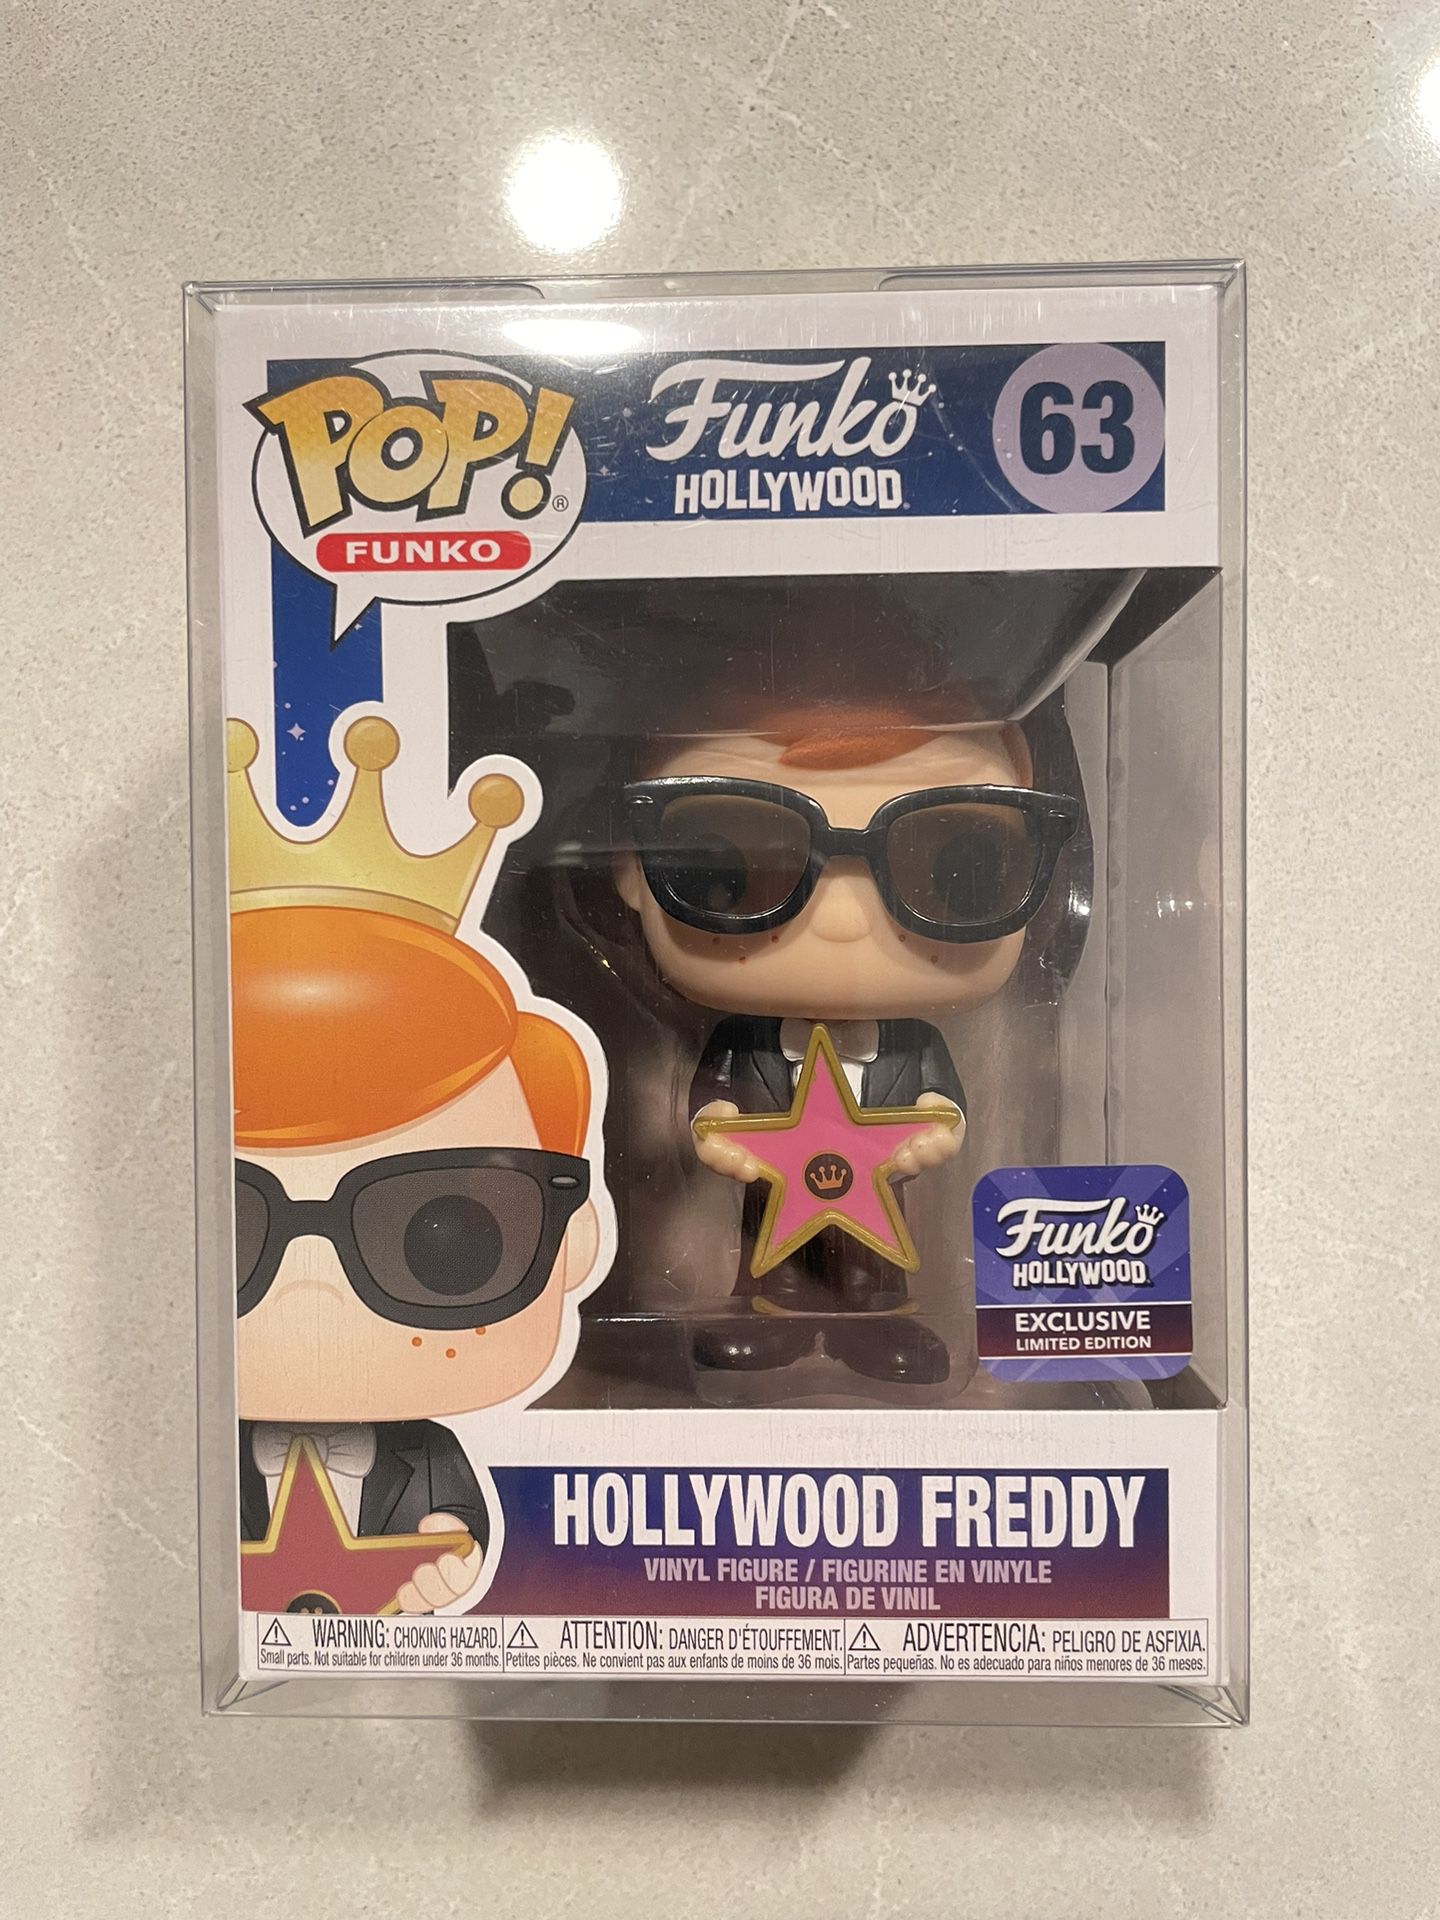 Hollywood Freddy Funko Pop *MINT* Hollywood Store Exclusive 63 with protector Holding Star Walk of Fame Sunglasses